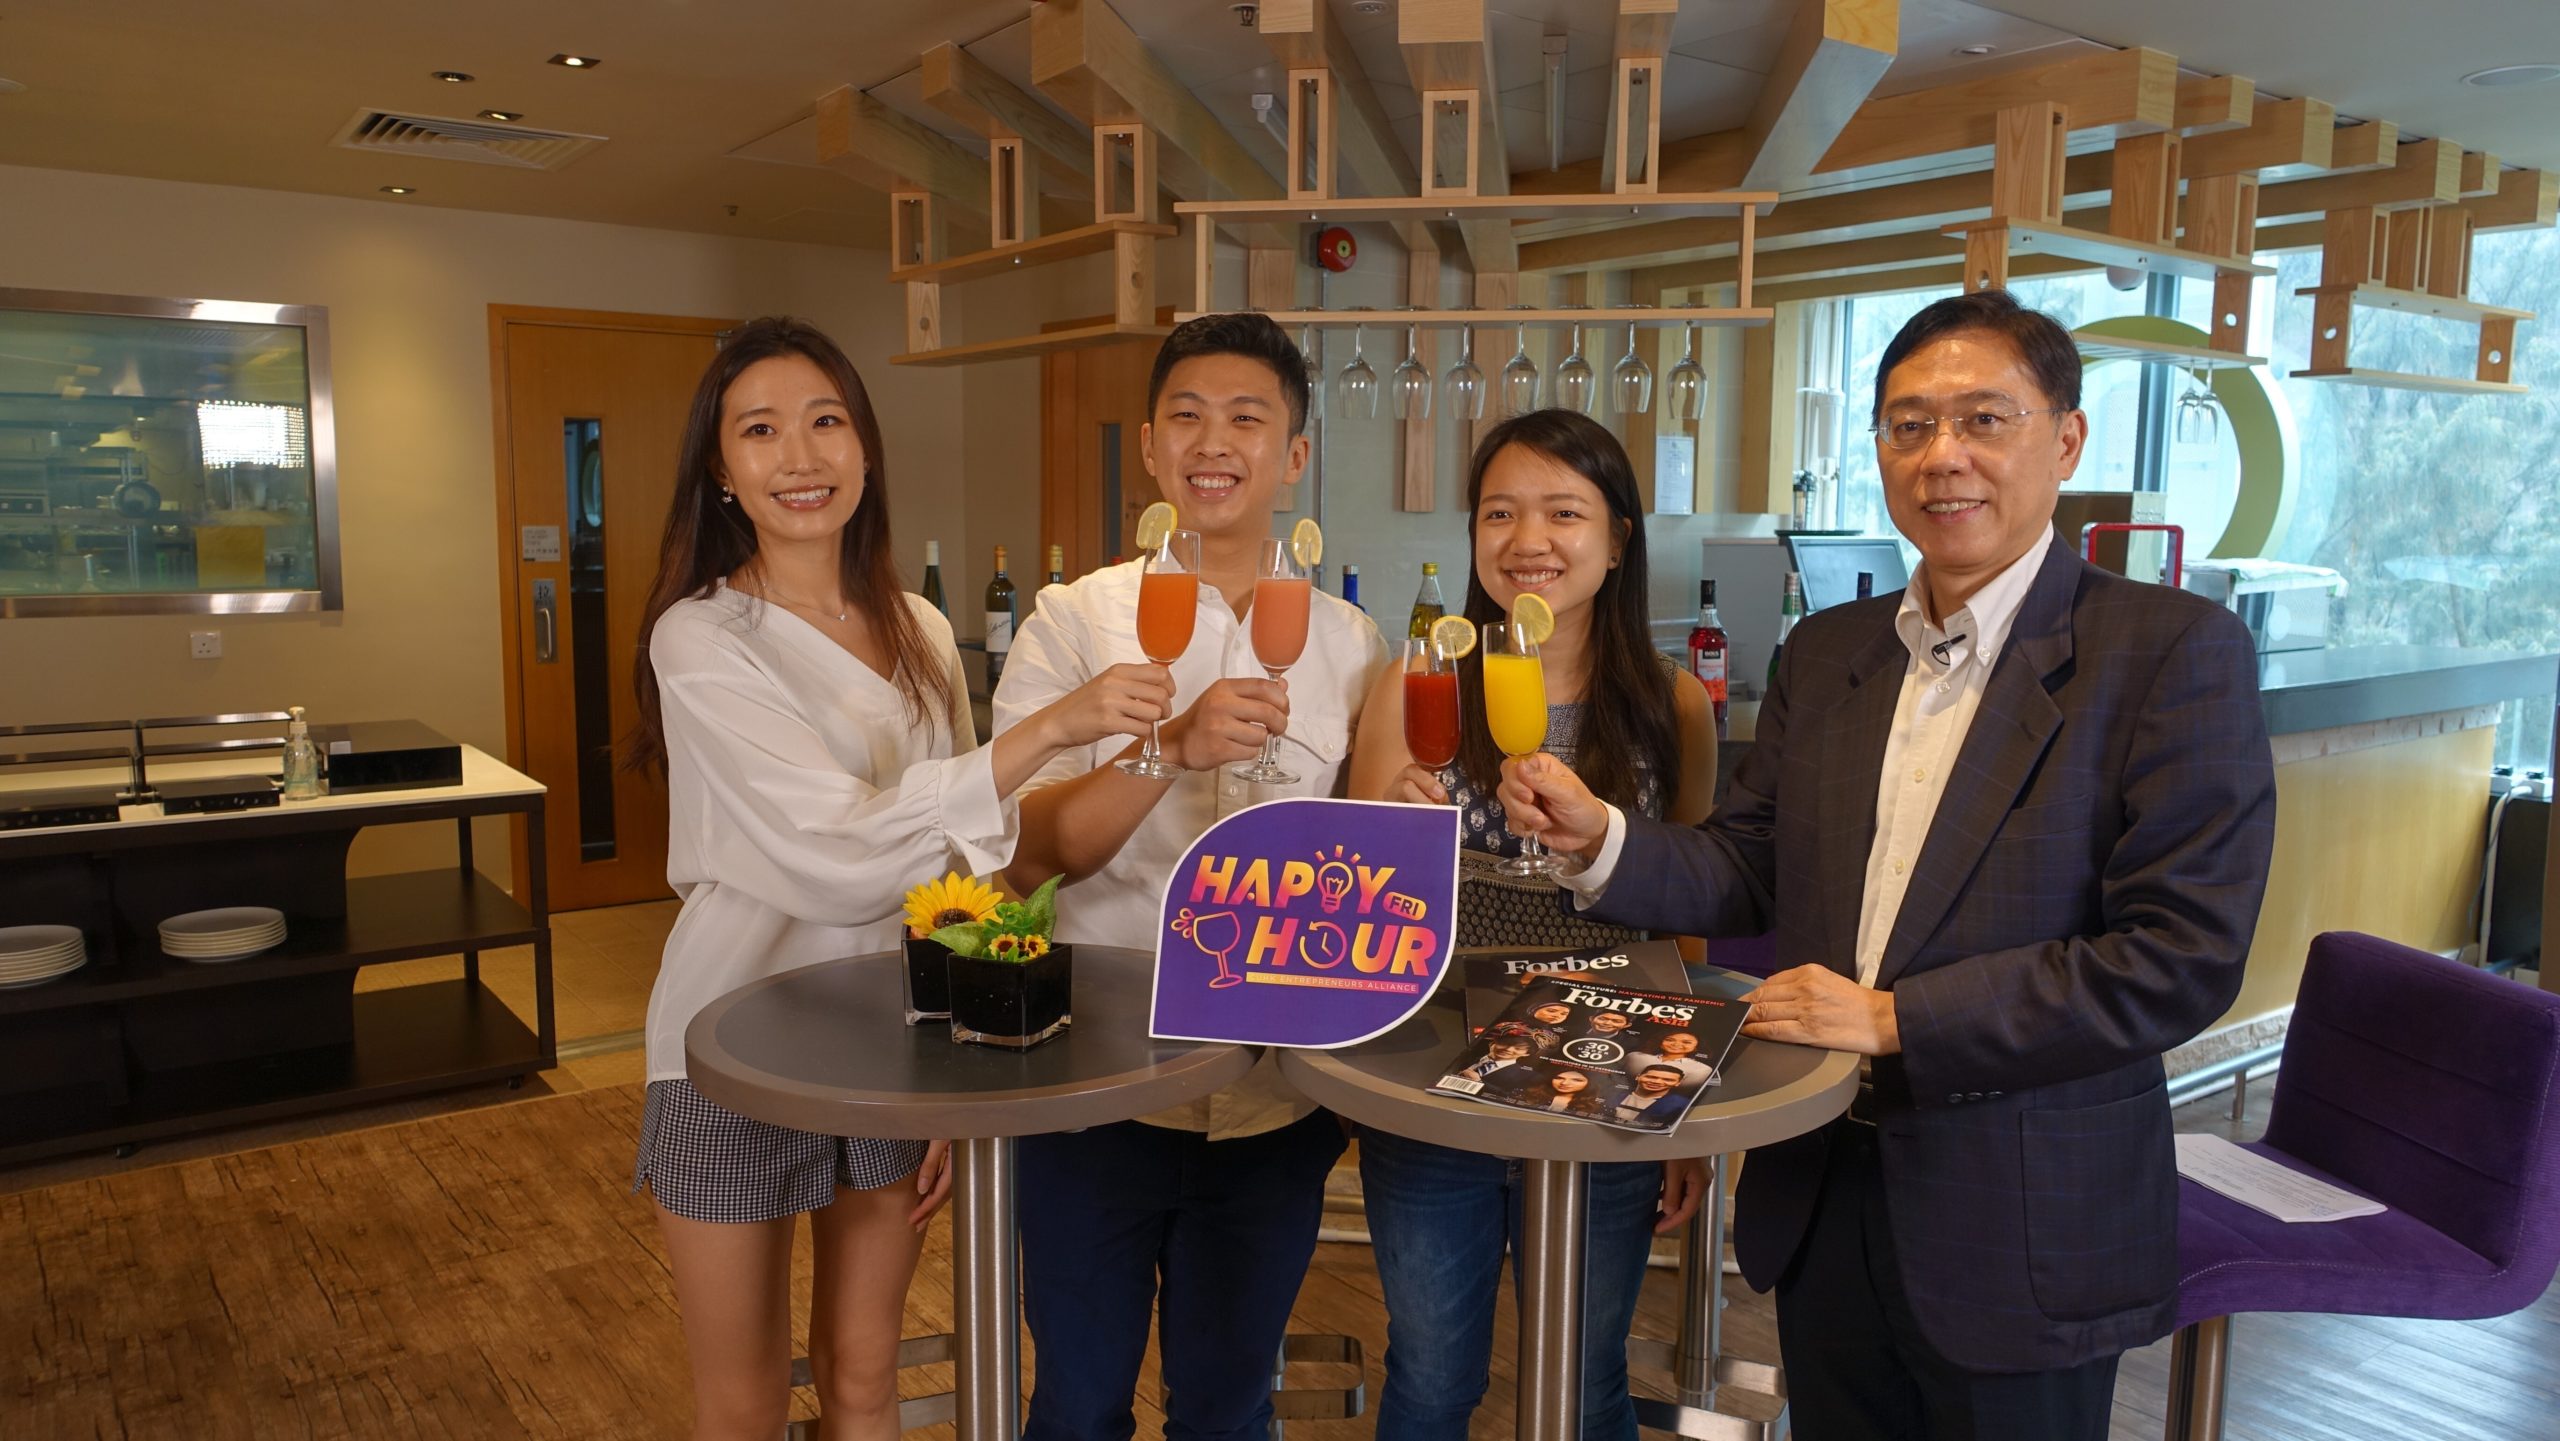 Peter Hung hosted a Happy Hour session of the CUHK Entrepreneurs Alliance and spoke with three alumni of the CUHK Business School who were selected by “Forbes 30 Under 30 Asia”.